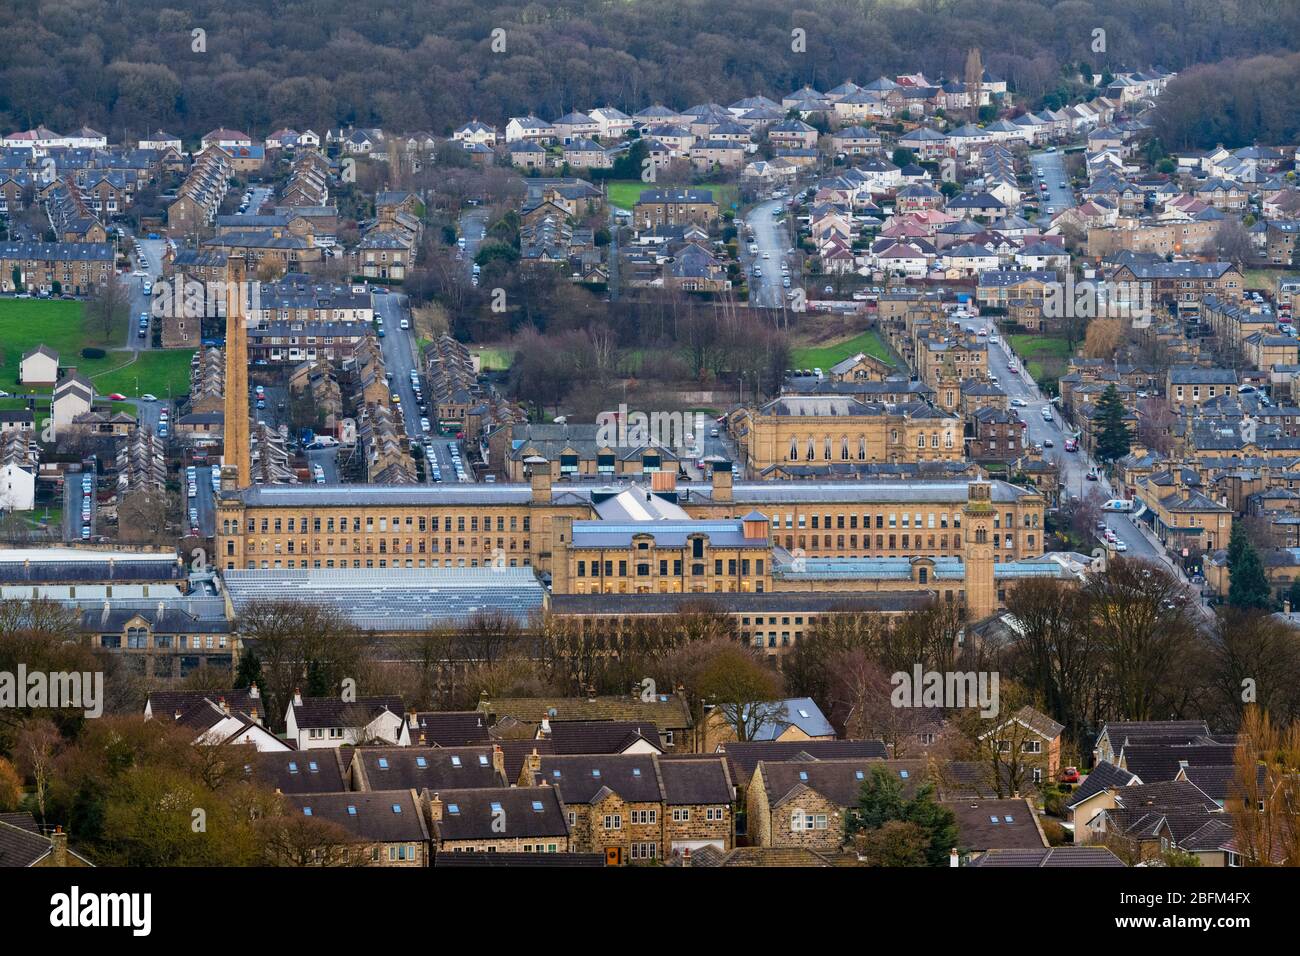 Historic impressive Victorian textile mill (art gallery) in Aire valley, tall chimney towering over houses - Salts Mill, Saltaire, Bradford England UK Stock Photo